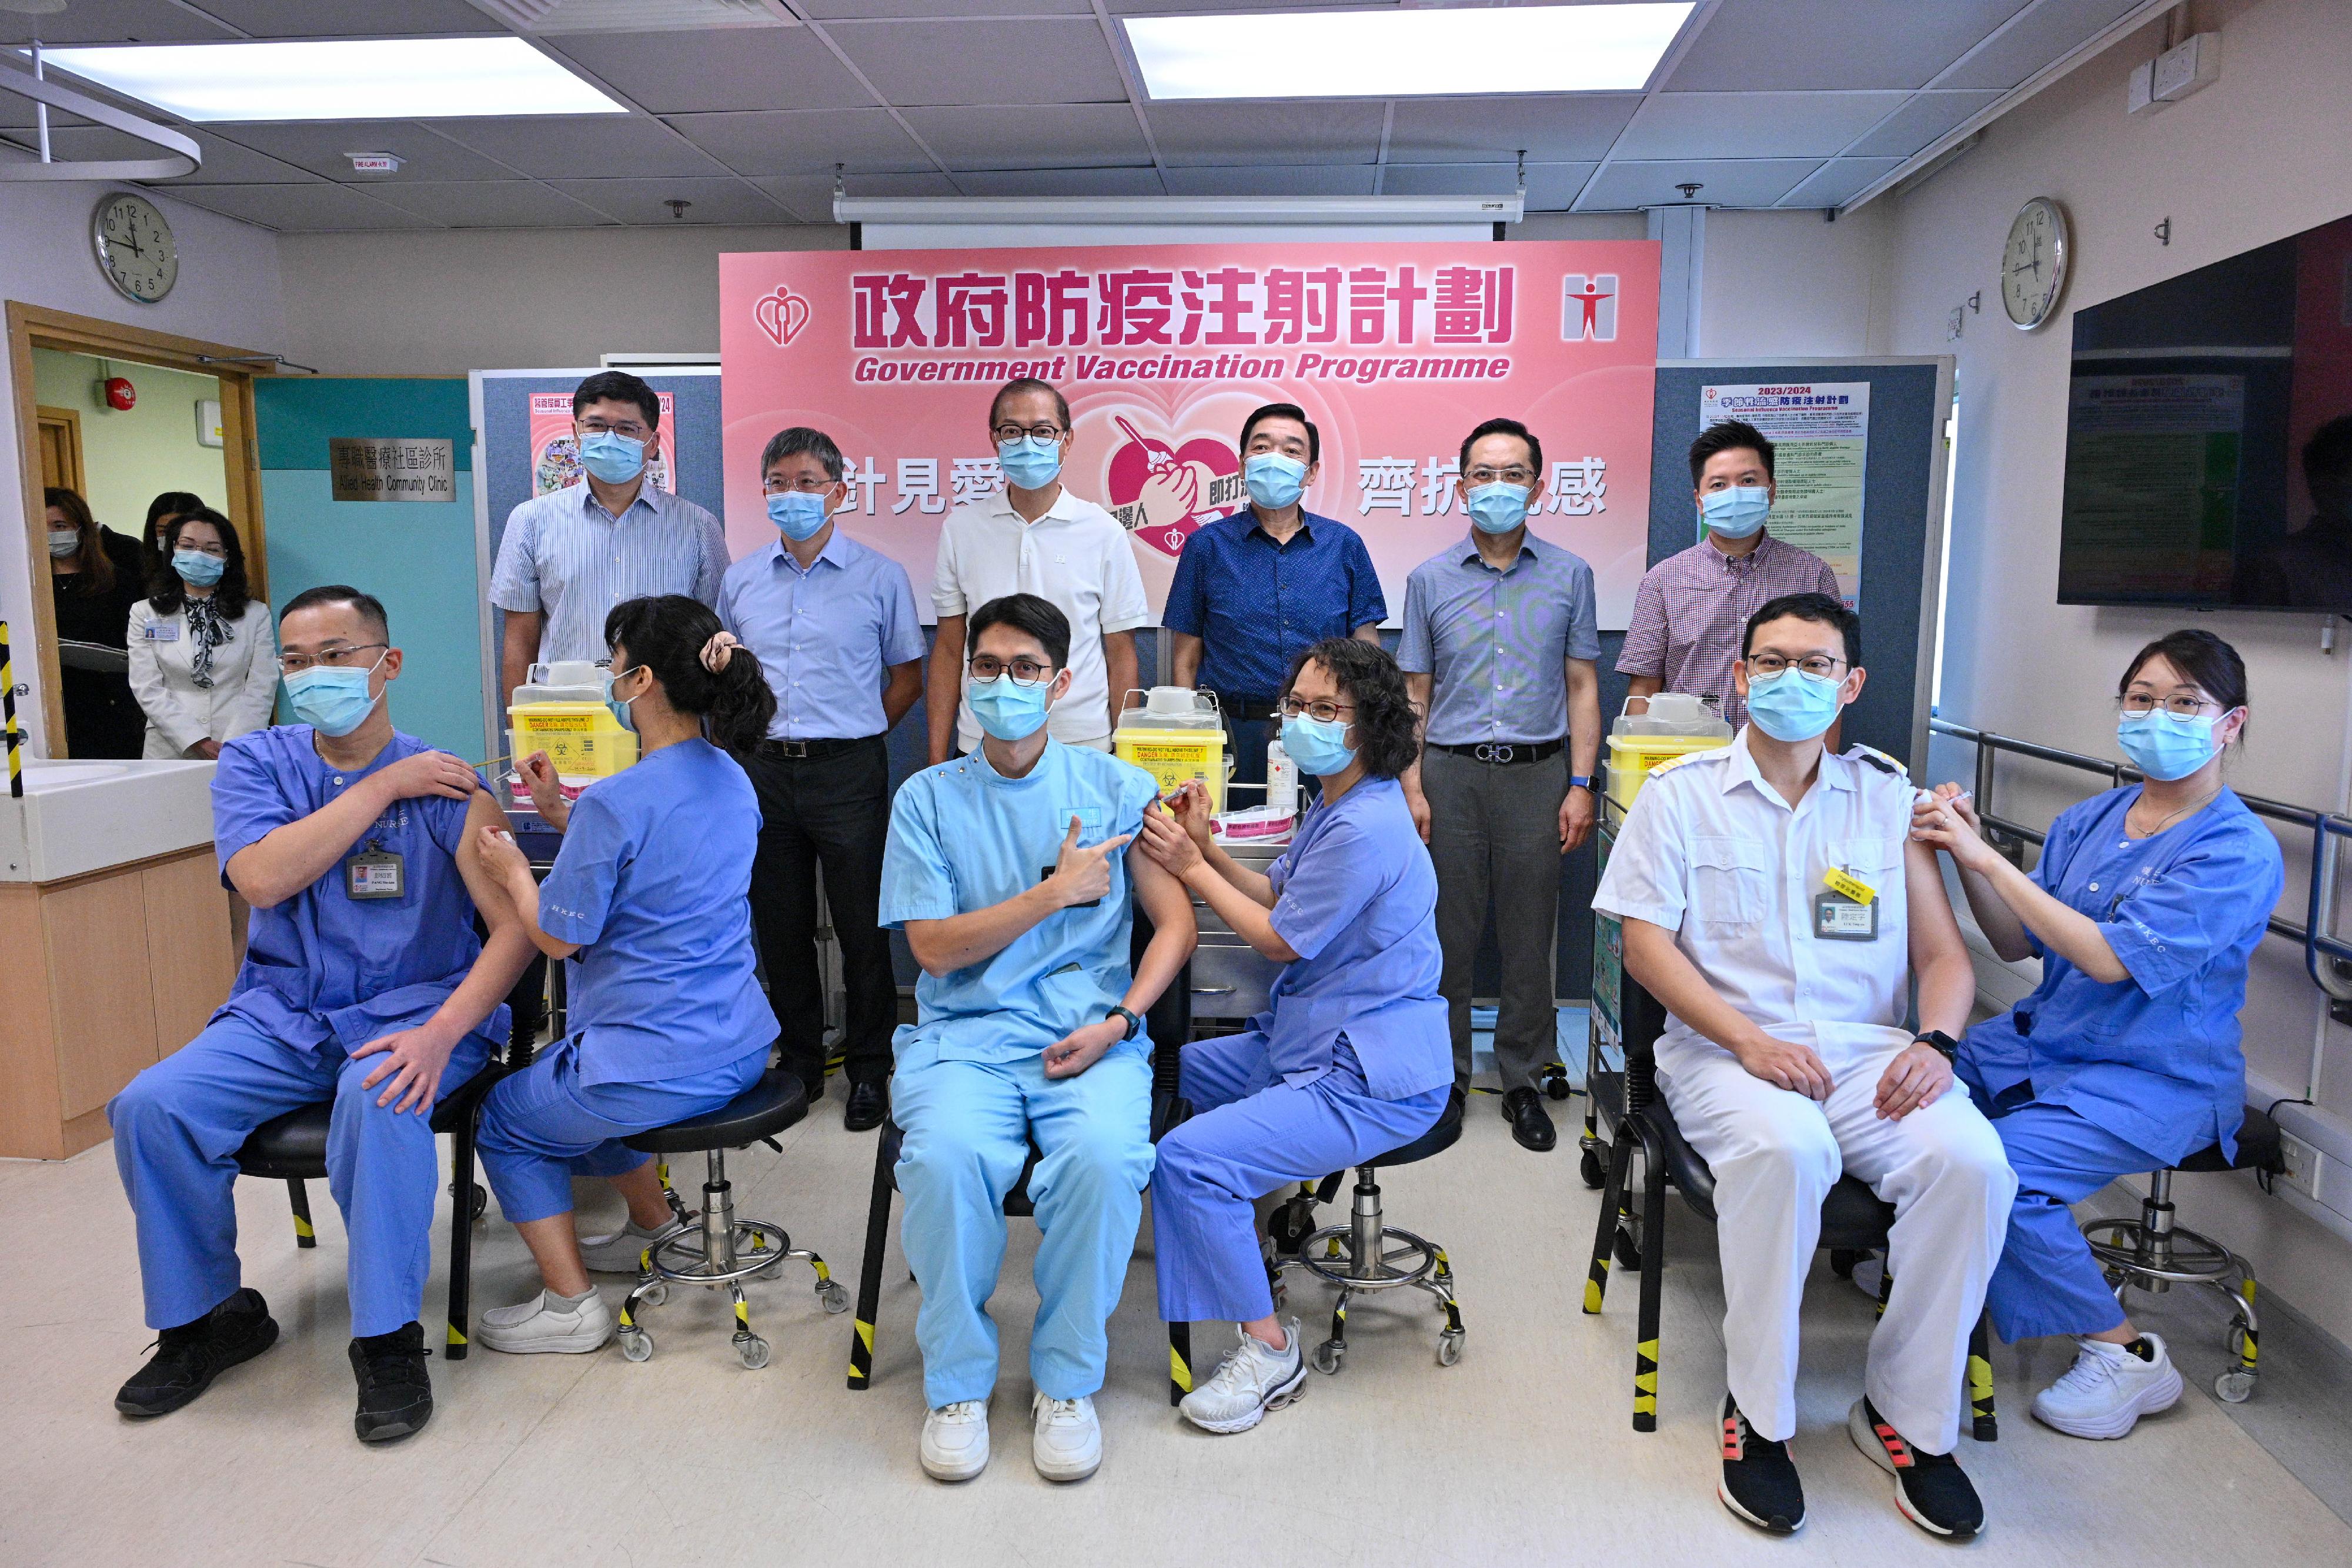 The Secretary for Health, Professor Lo Chung-mau (back row, third left); the Permanent Secretary for Health, Mr Thomas Chan (back row, second left); the Director of Health, Dr Ronald Lam (back row, second right); the Controller of the Centre for Health Protection of the Department of Health, Dr Edwin Tsui (back row, first right); the Chairman of the Hospital Authority (HA), Mr Henry Fan (back row, third right); and the Chief Executive of the HA, Dr Tony Ko (back row, first left), look on as frontline healthcare workers receive the seasonal influenza vaccination at the Sai Wan Ho General Out-patient Clinic today (September 28).